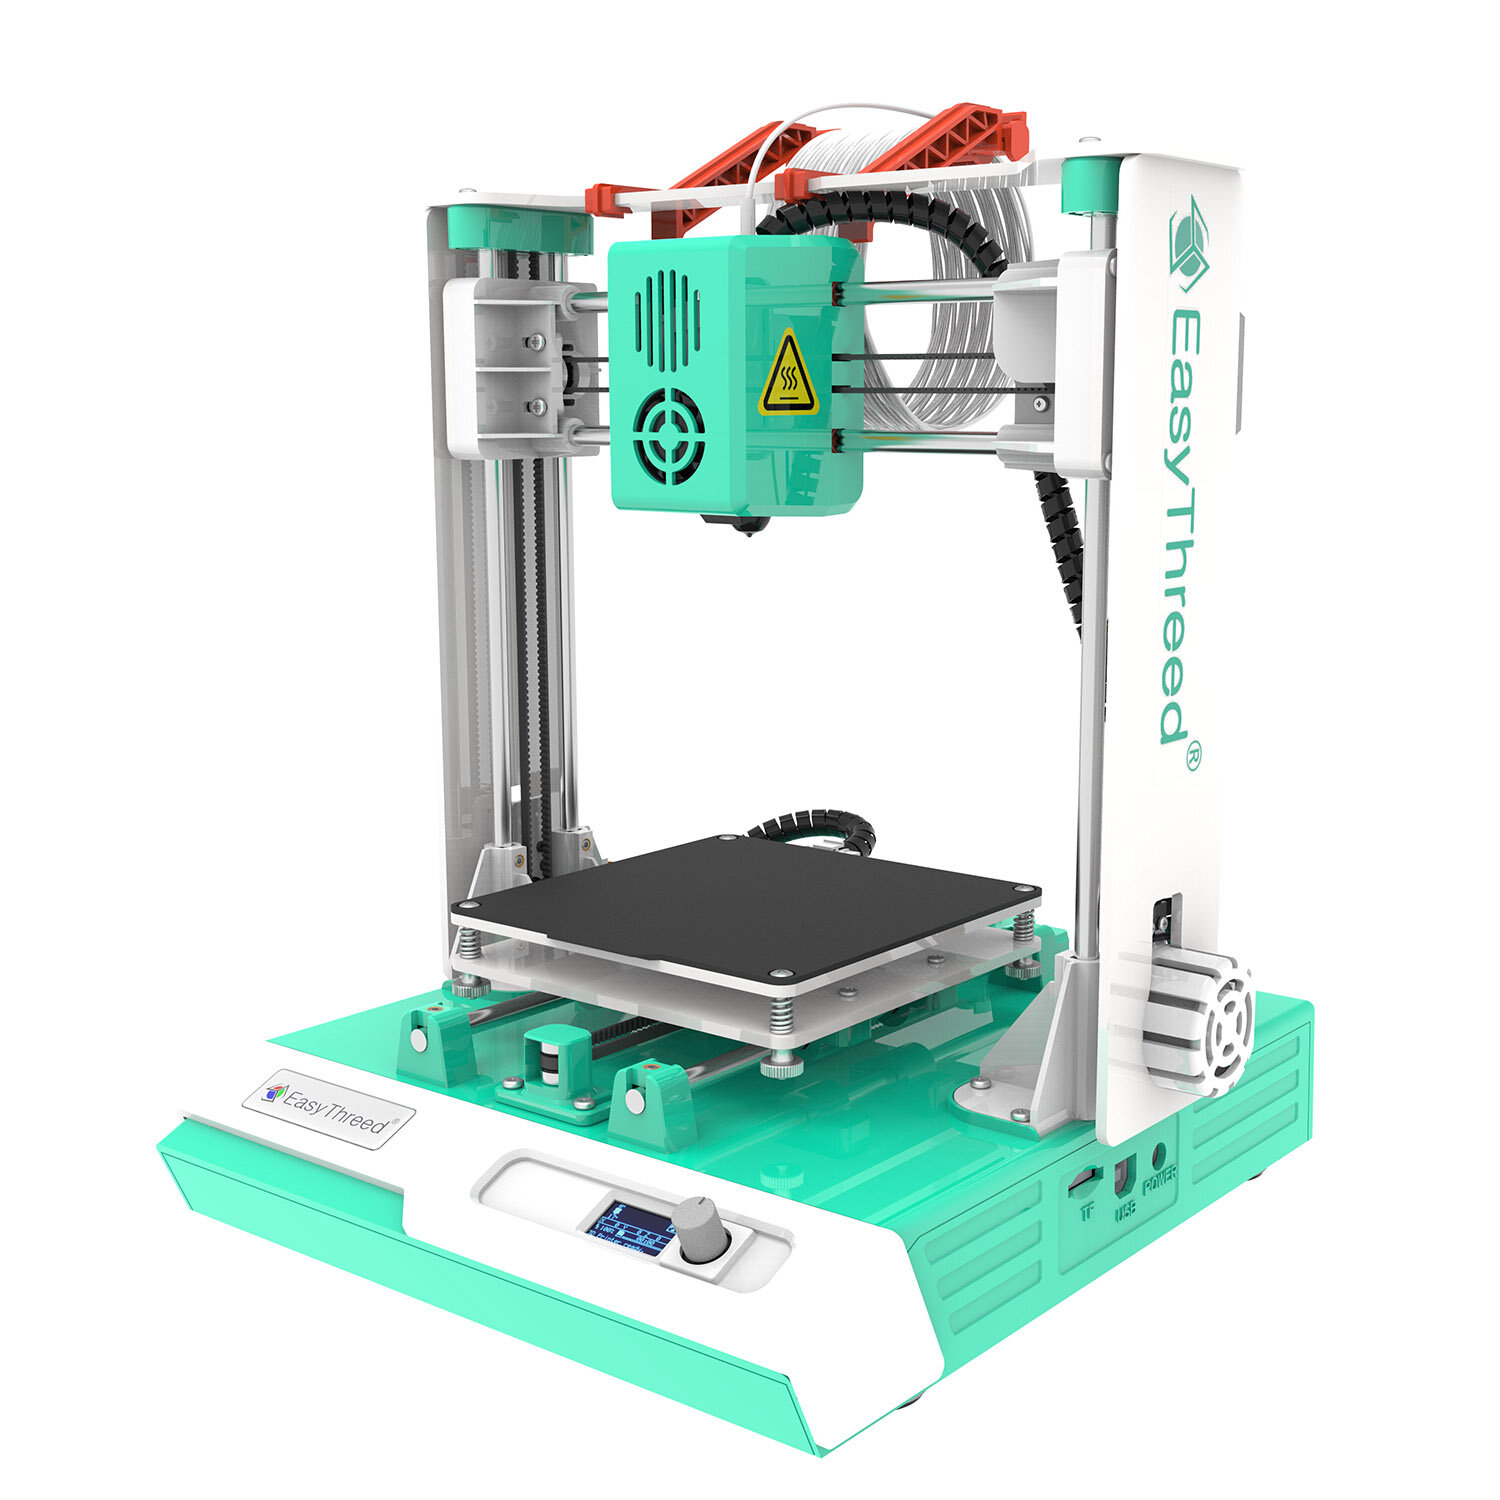 Easythreed® K2 Plus 3D Printer Kit 100X100X100mm Print Size with Hotbed/LCD Screen Control/Larger Axis Motor